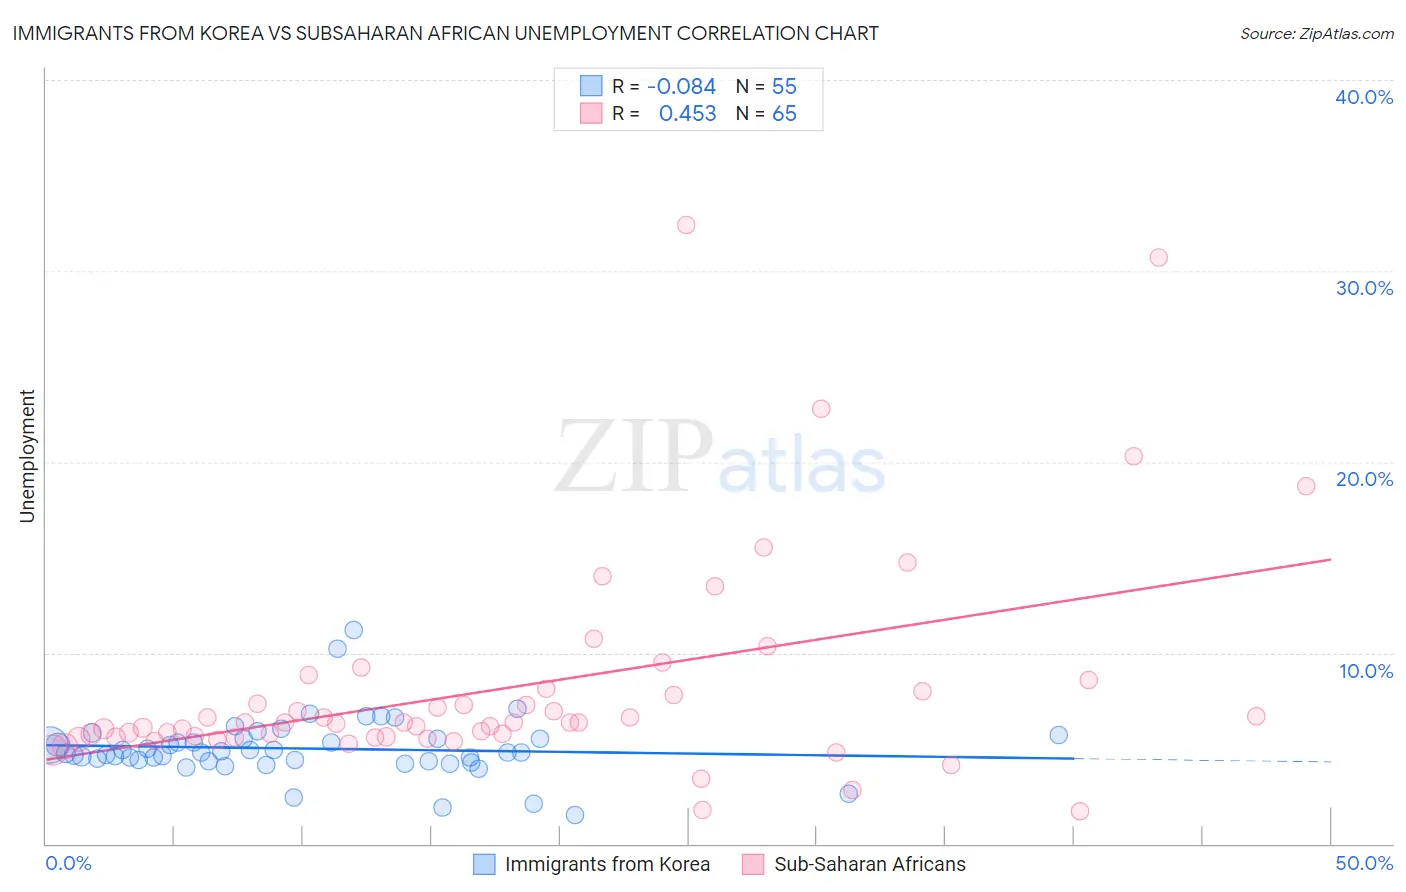 Immigrants from Korea vs Subsaharan African Unemployment